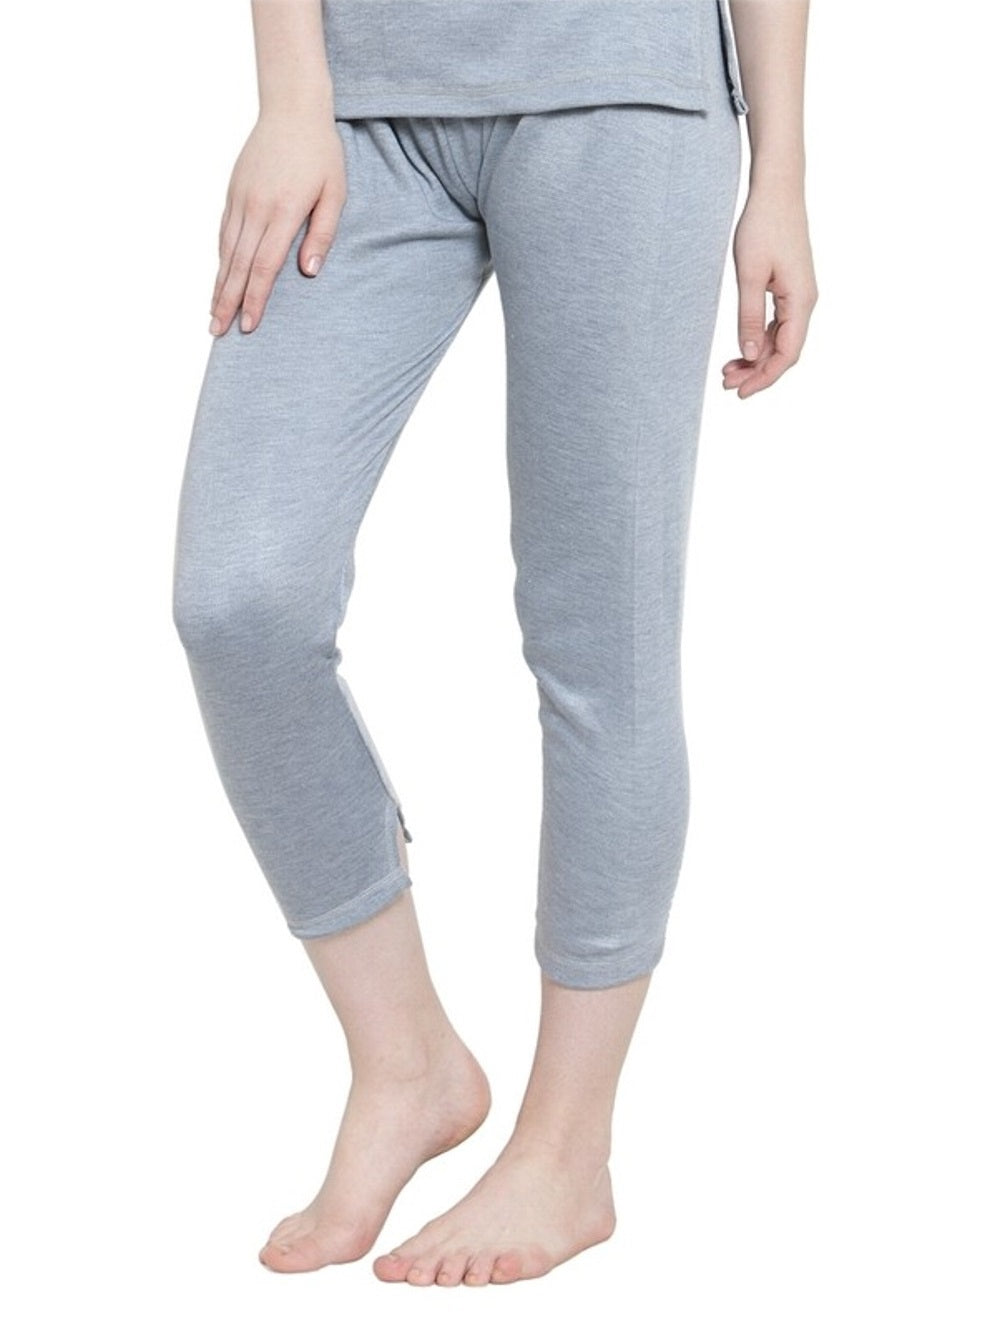 WOMEN'S SOLID THERMAL BOTTOM